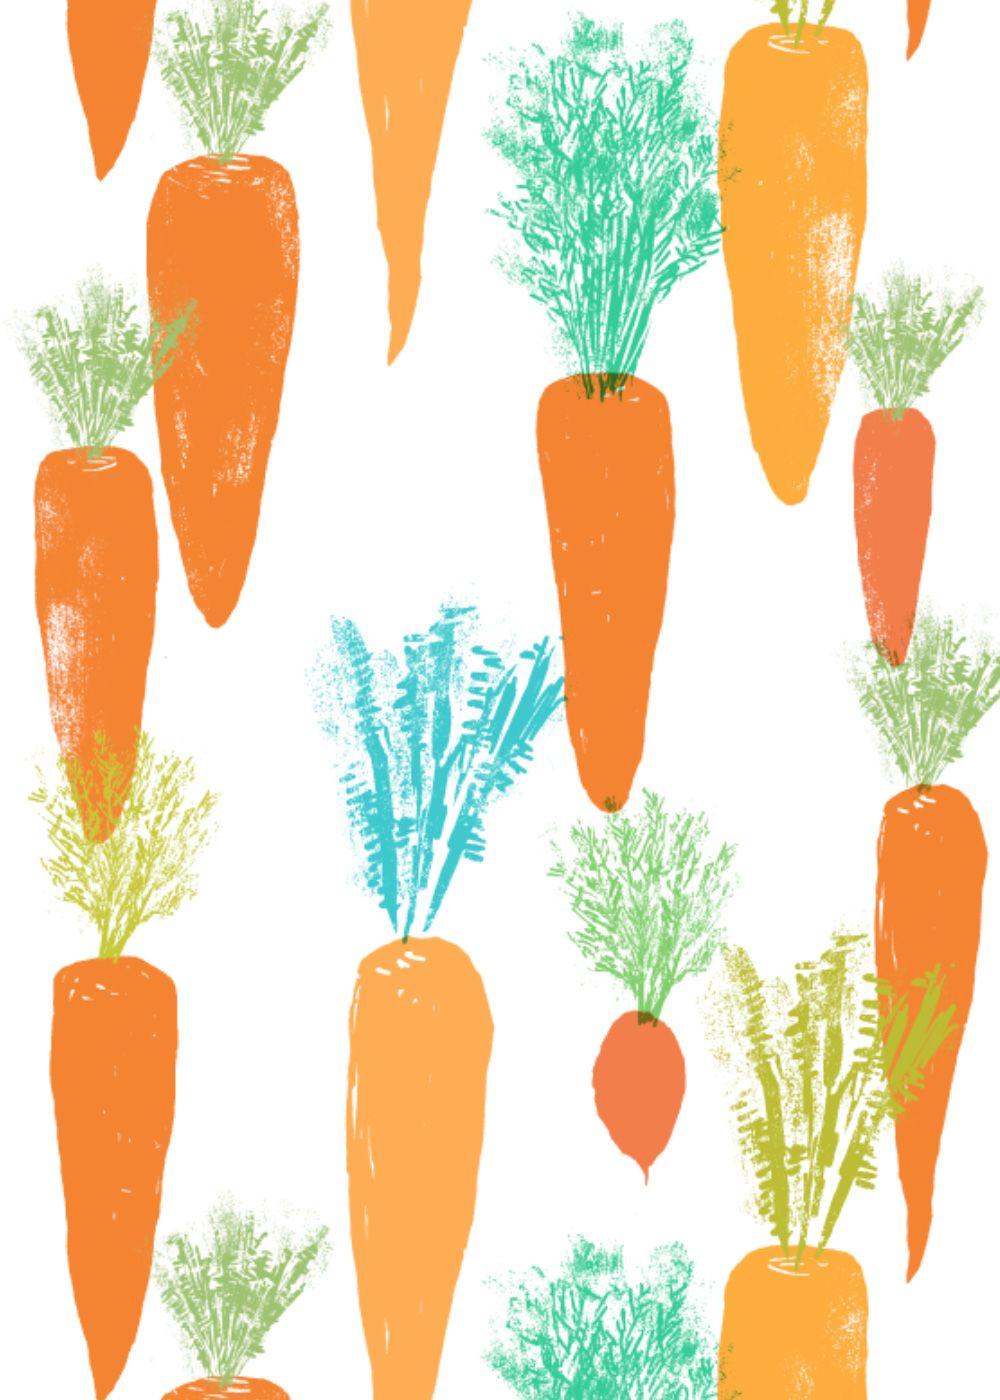 carrot fabric/ wallpaper / wrapping paper pattern design